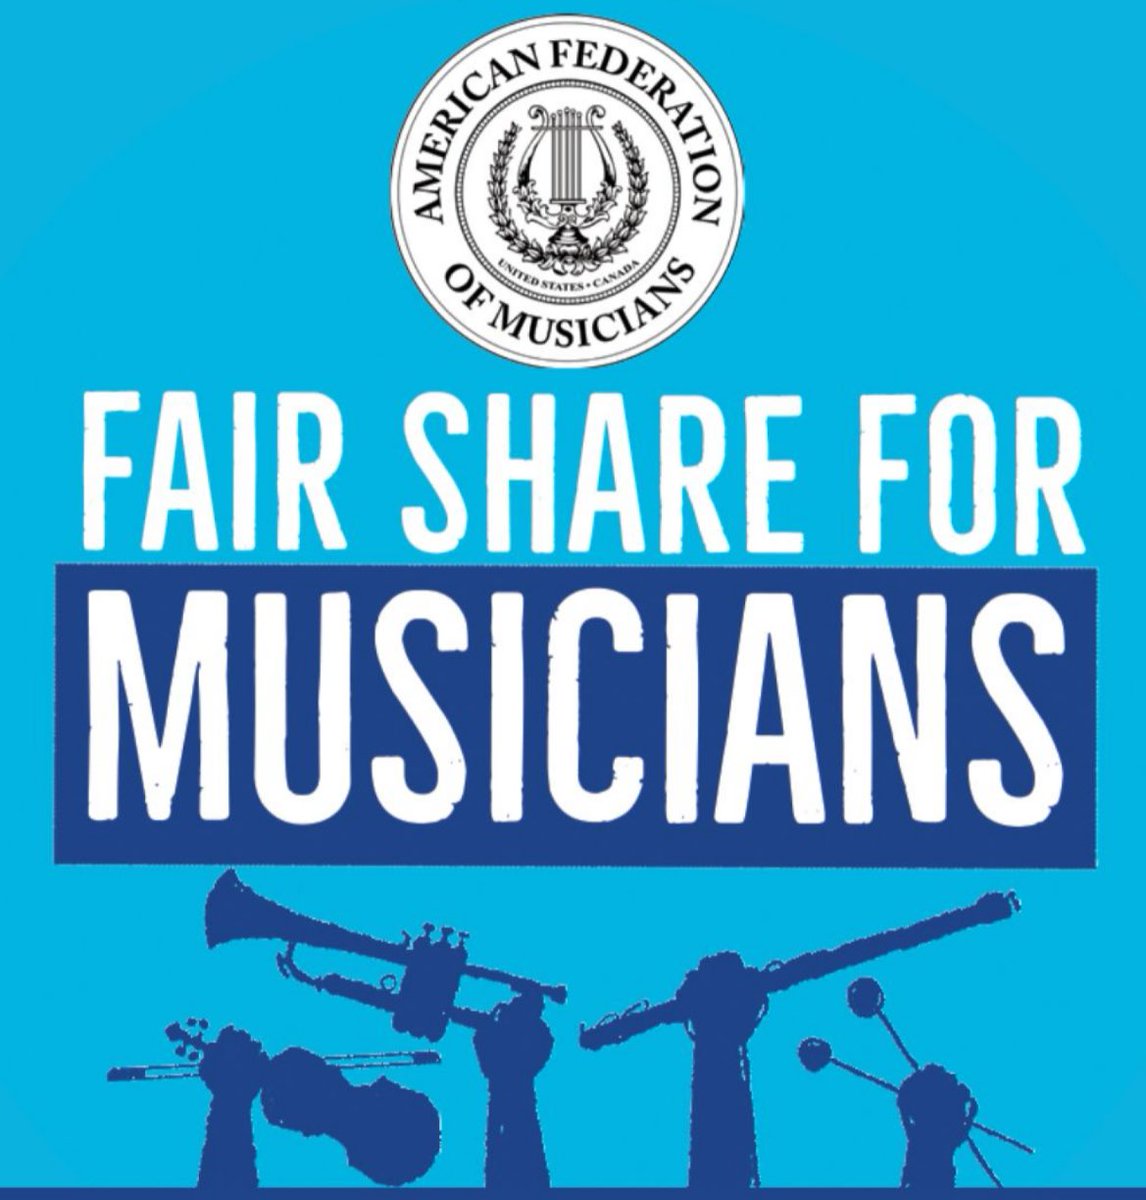 It’s our fellow union's turn to negotiate a fair & sustainable contract with the AMPTP! Next week, @The_AFM begins bargaining for many of the same protections we did. Sign the Petition to tell the AMPTP it's time for musicians to get their fair share #1u wgaea.st/afm-fairshare